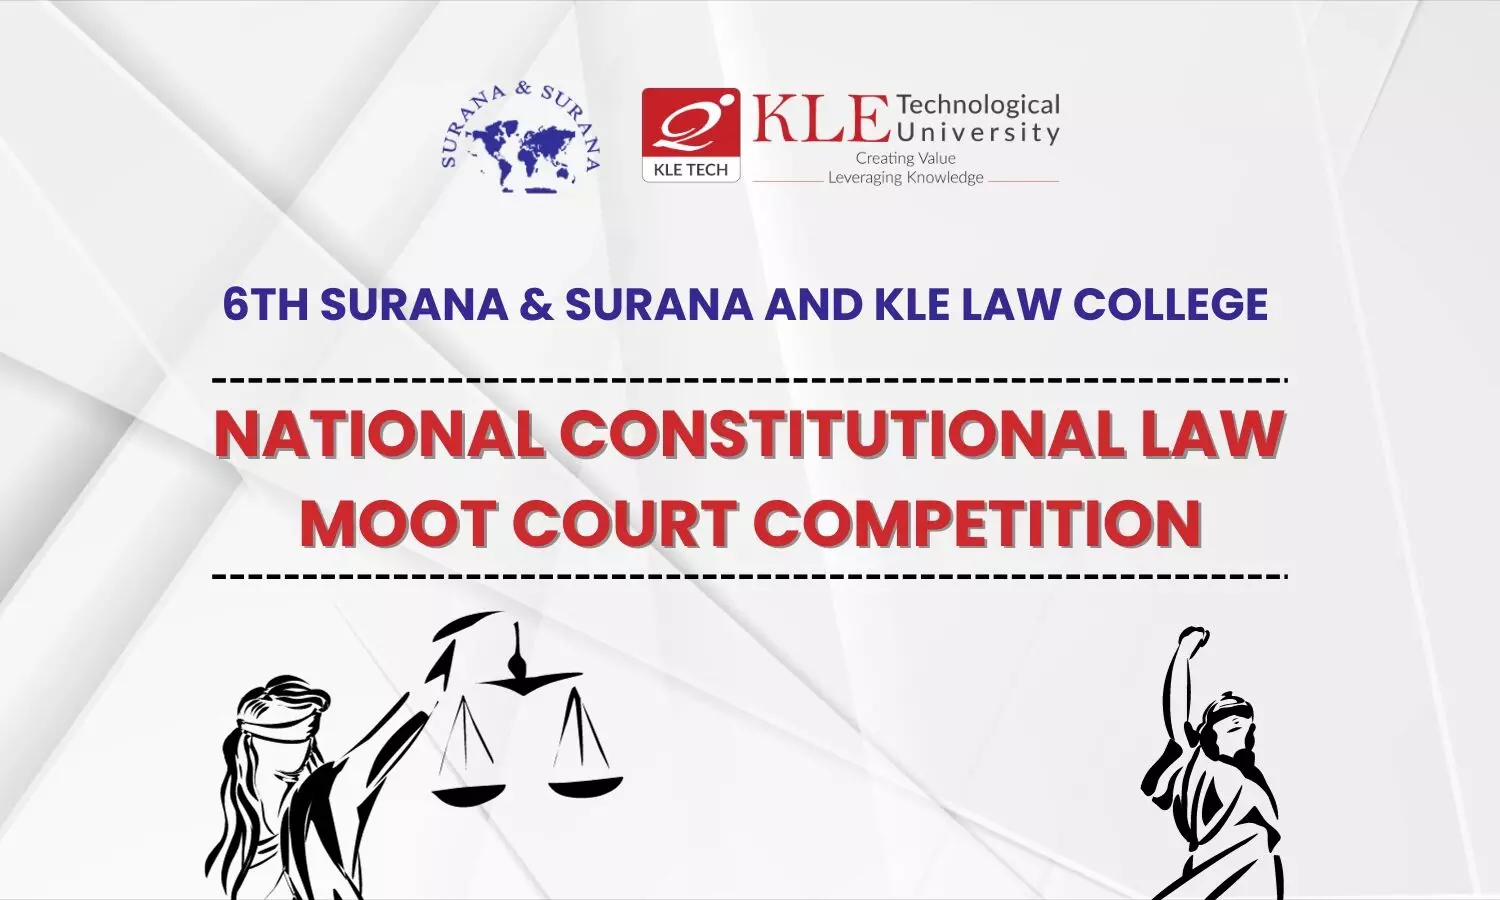 6th Surana & Surana and KLE Law College National Constitutional Law Moot Court Competition